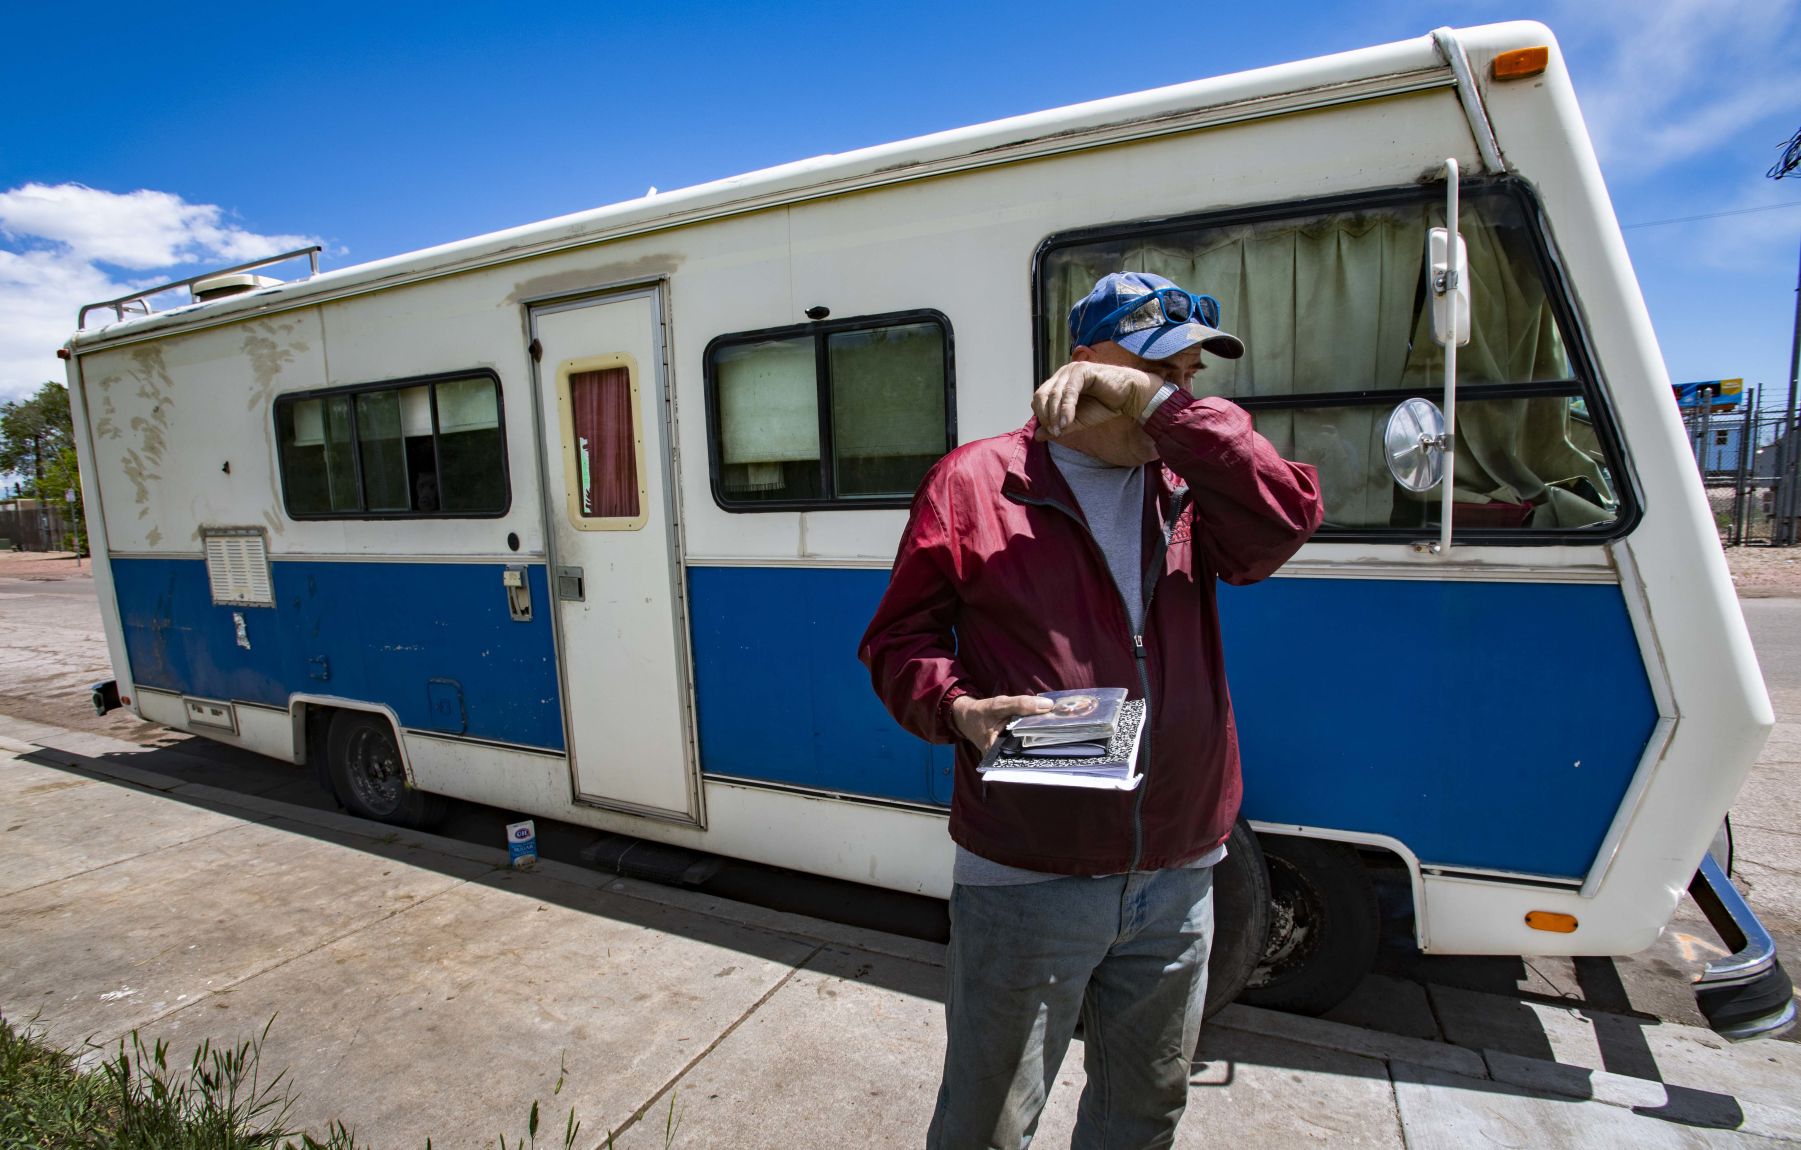 RV owners must move, or face tickets, as Colorado Springs street parking ban takes effect News gazette photo